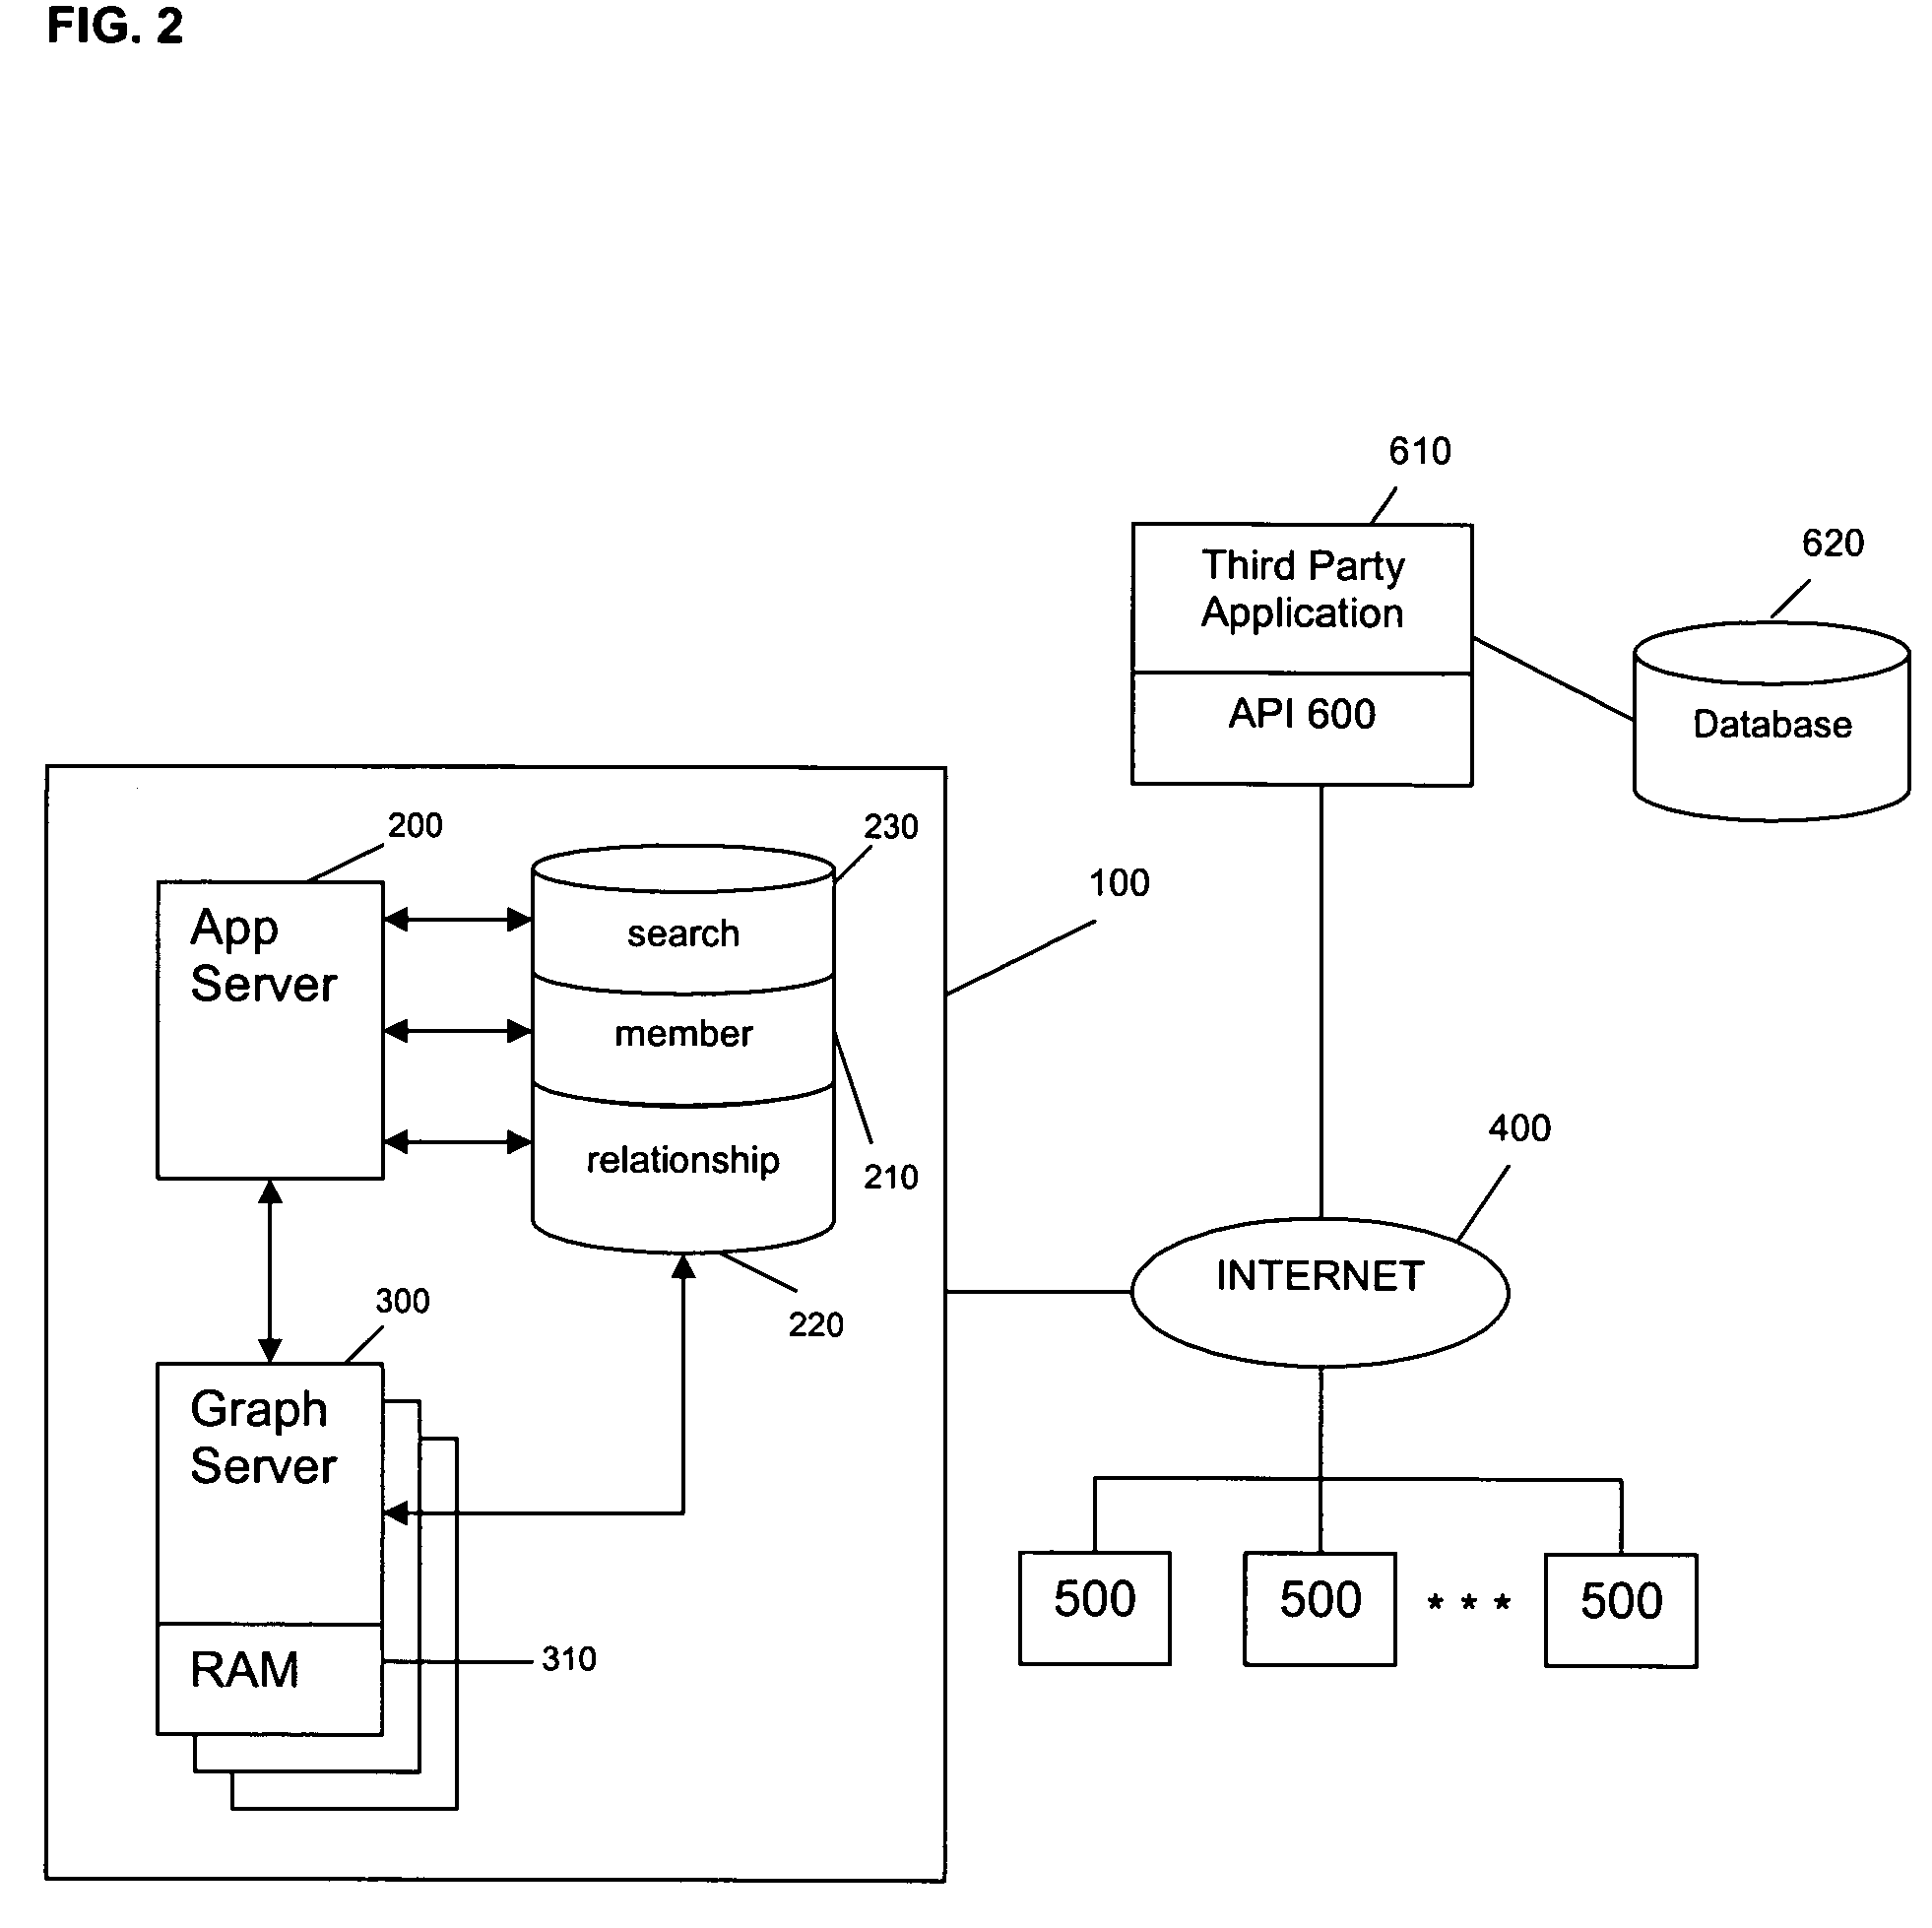 Method for sharing relationship information stored in a social network database with third party databases